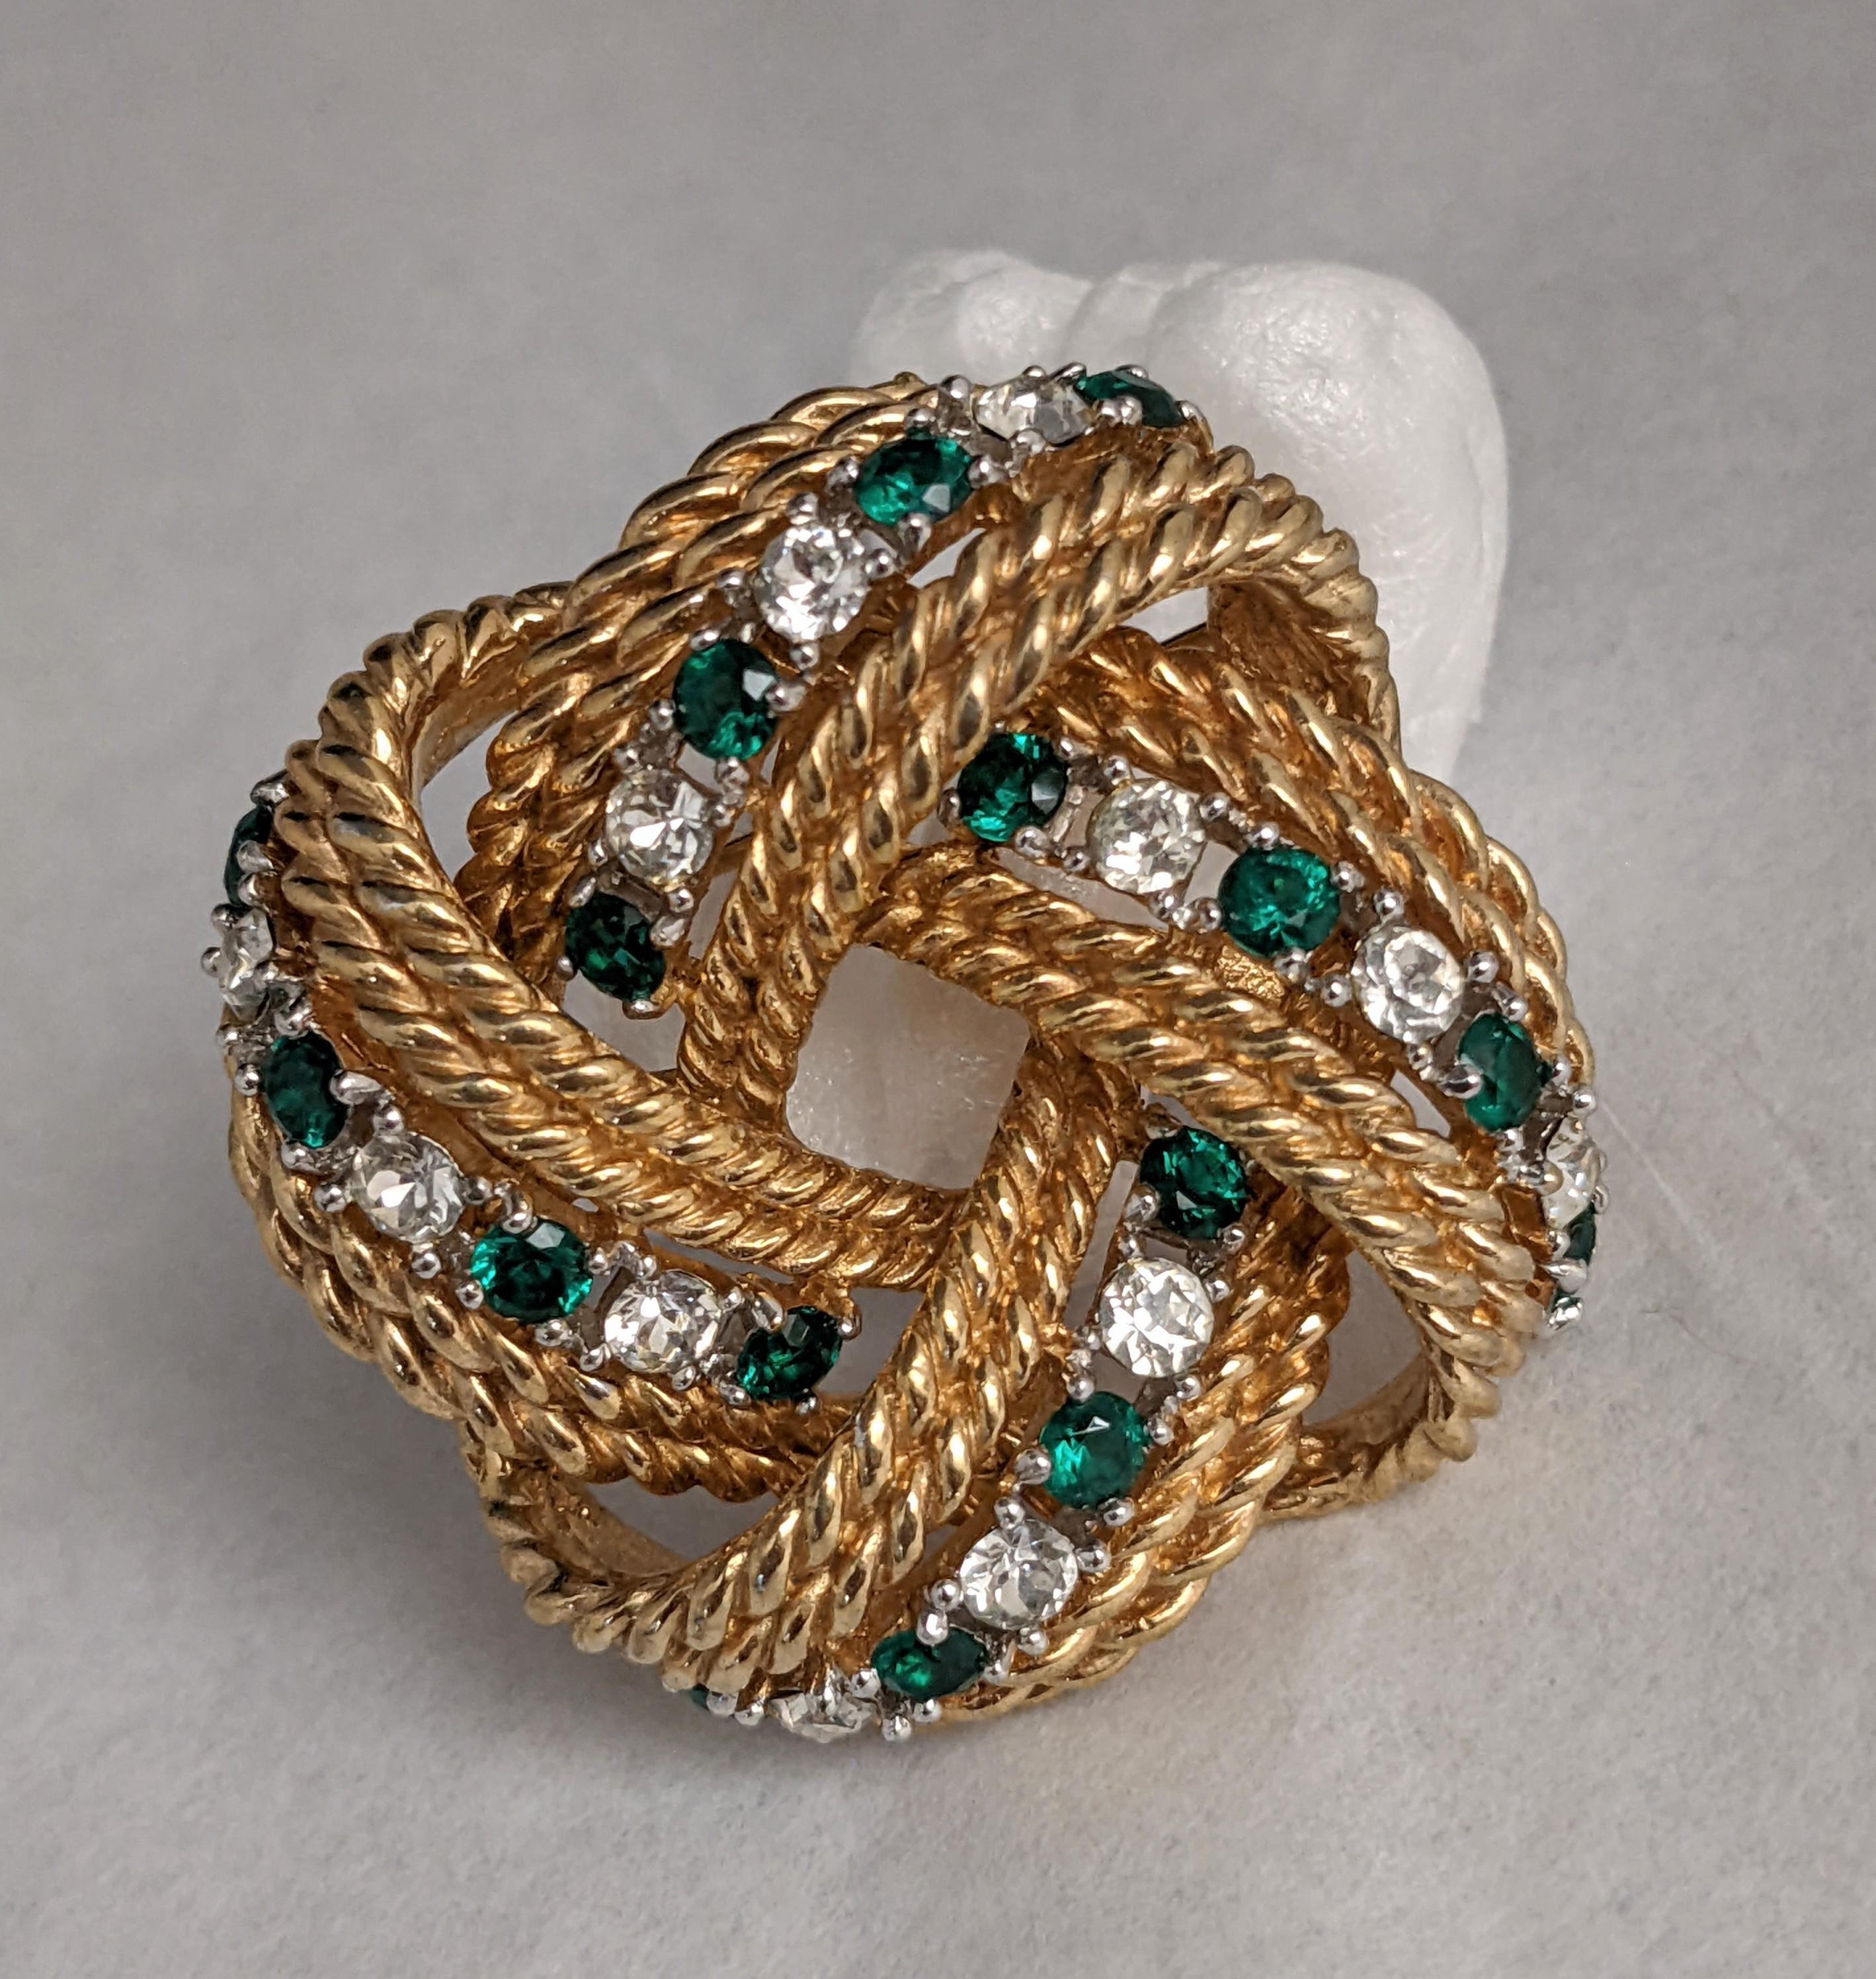 Marcel Boucher Emerald and Crystal Wreath brooch from the 1950's. Dimensional gilt wires are set with emerald and crystal pastes in this elegant brooch.
1.5